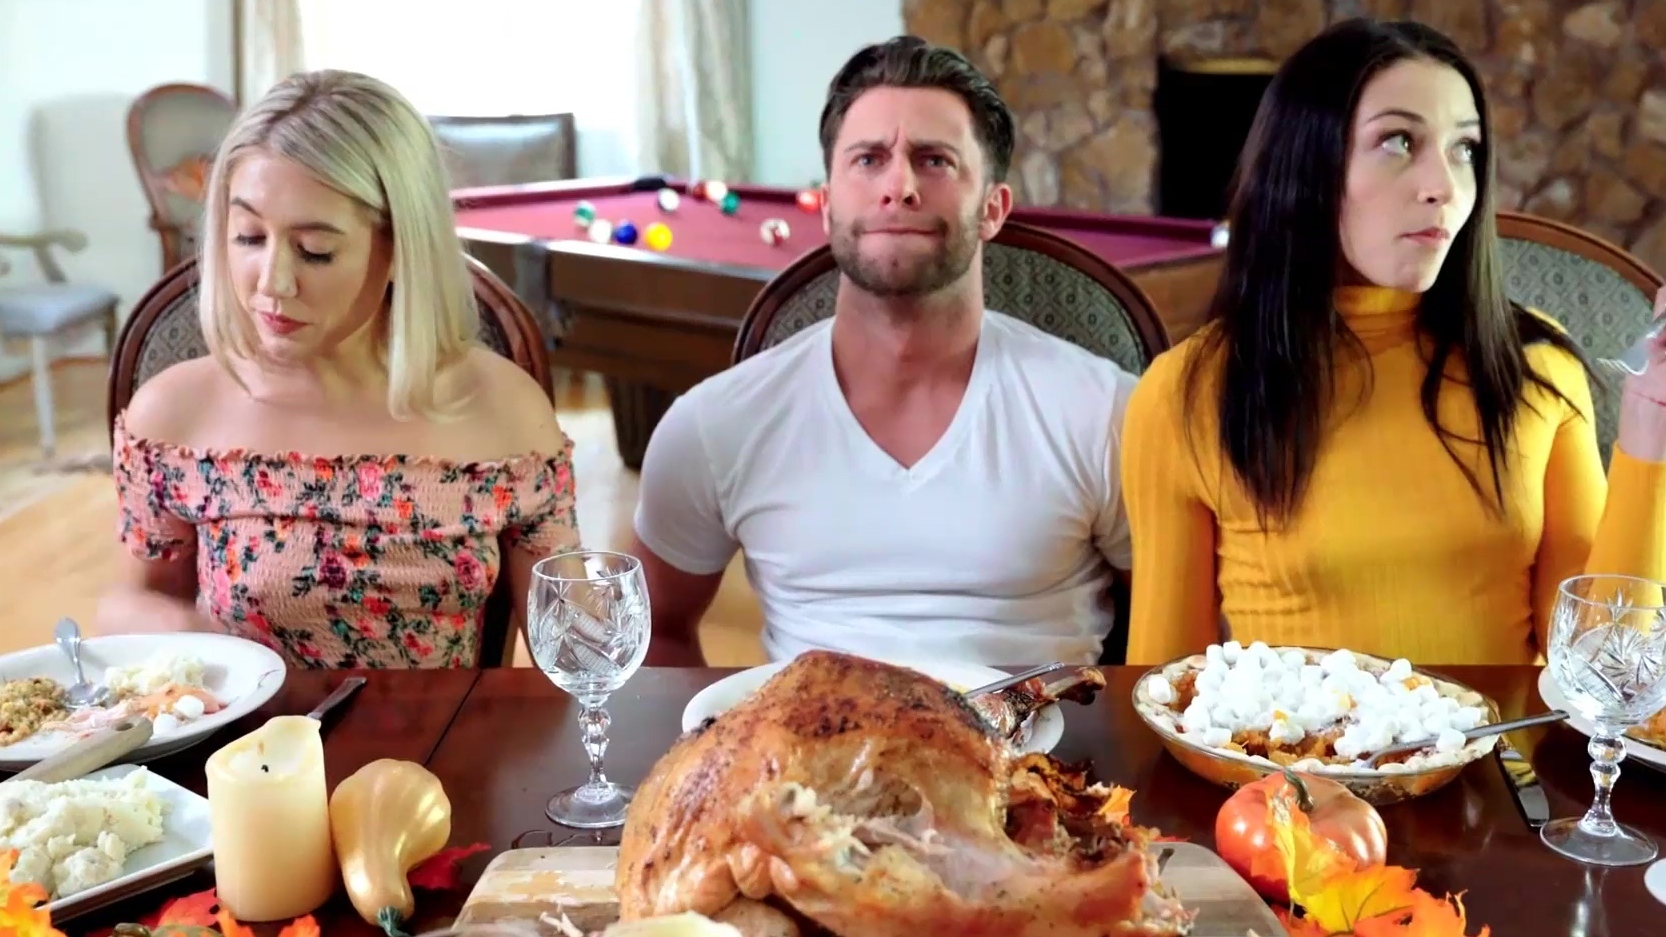 Wild handjob from brunette and blonde stepsisters during Thanksgiving dinner picture image